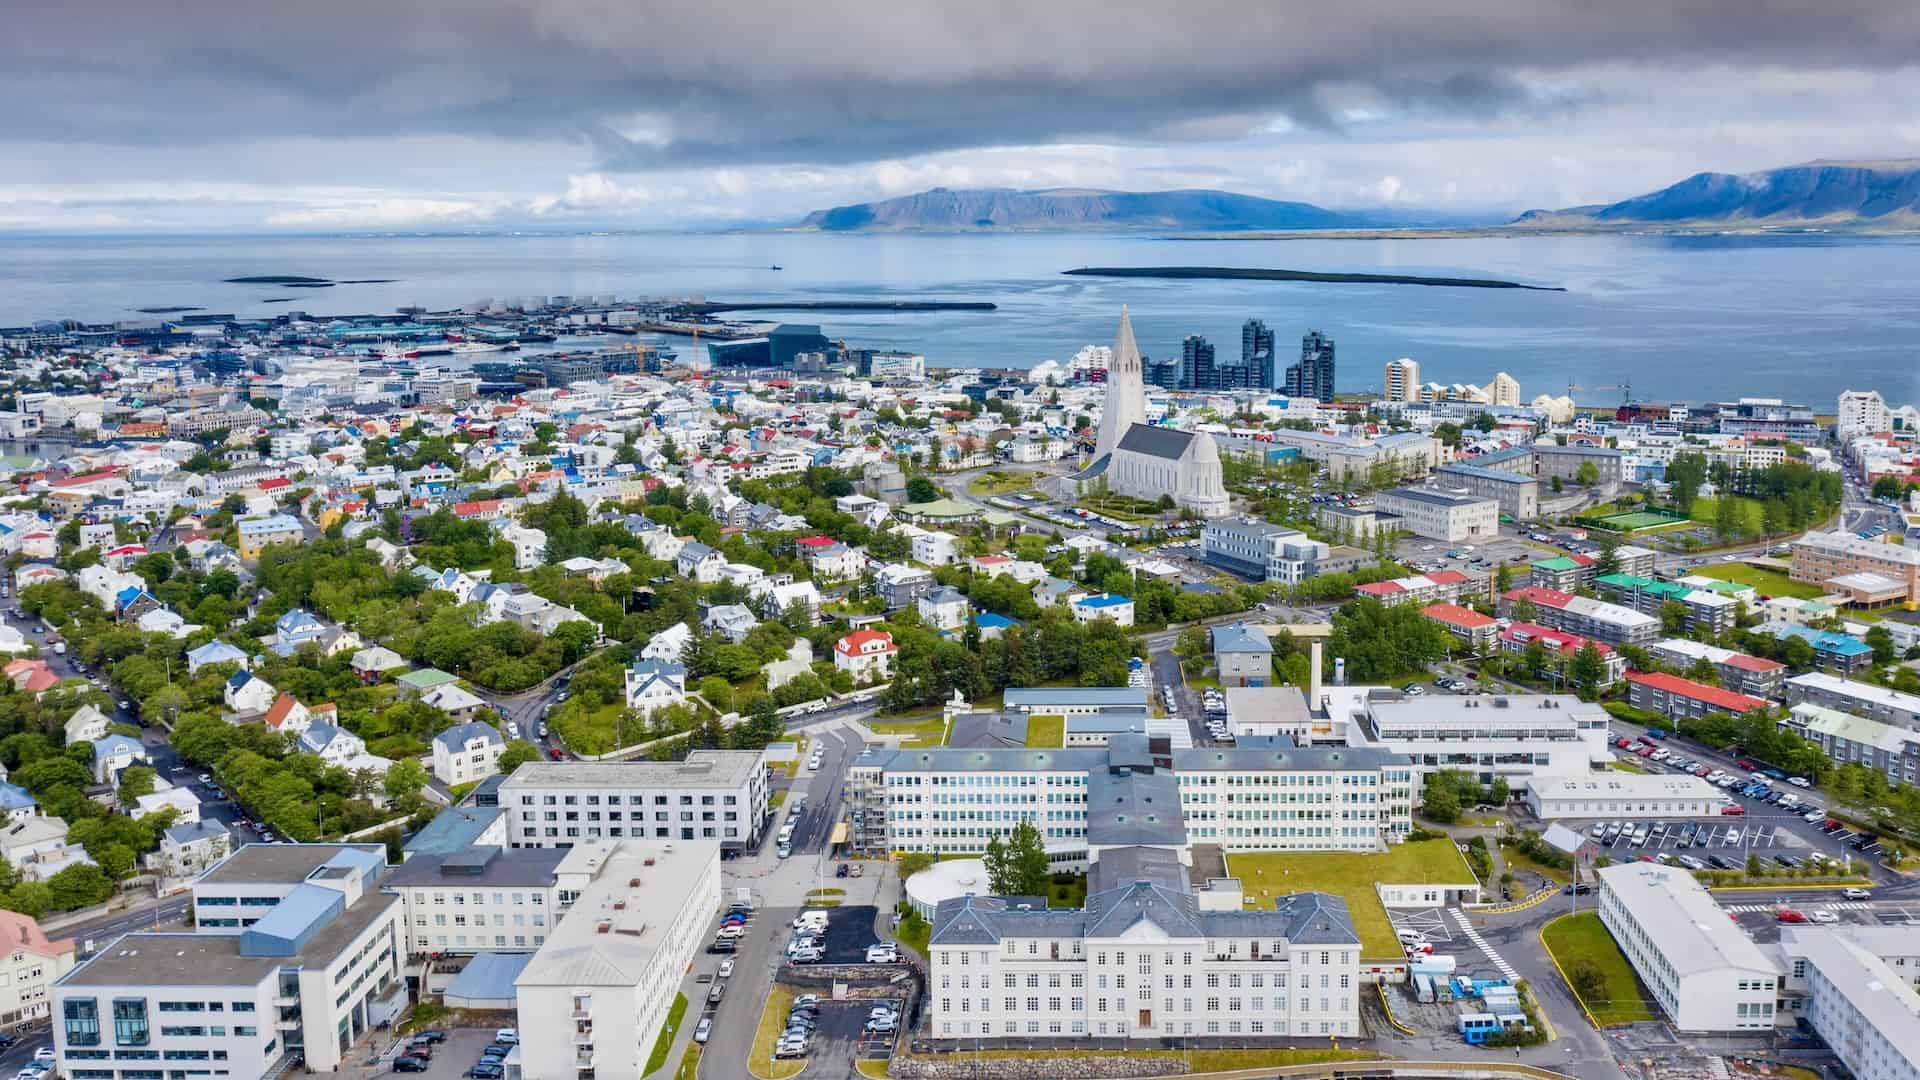 Reykjavik Travel Guide: How to Explore the Northernmost Capital in the World